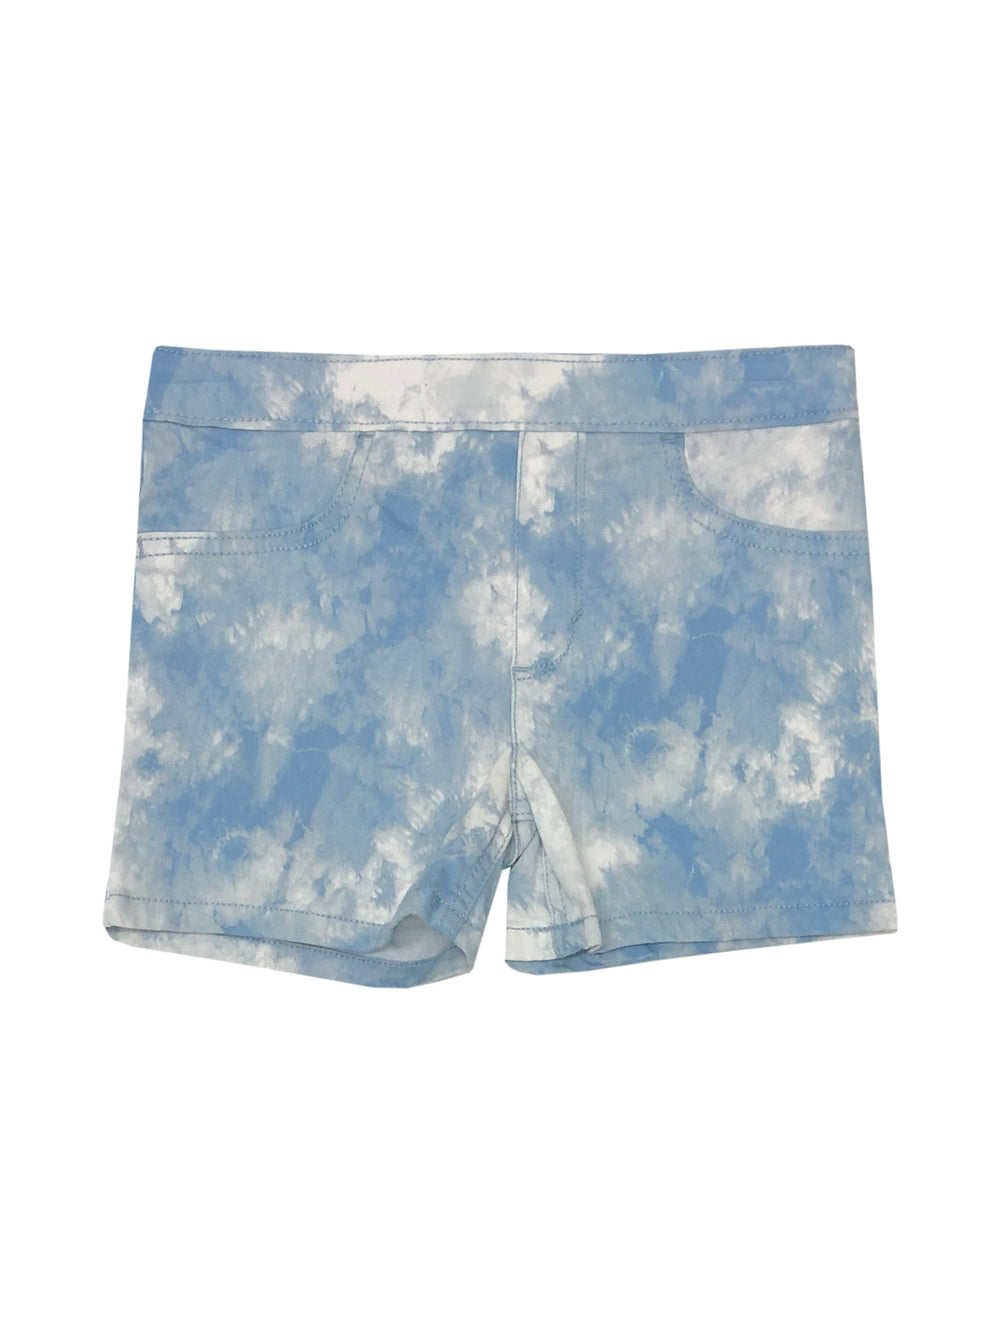 YOUTH GIRLS LEVIS CLOUD WASH PULL ON SHORTS - CLEARANCE